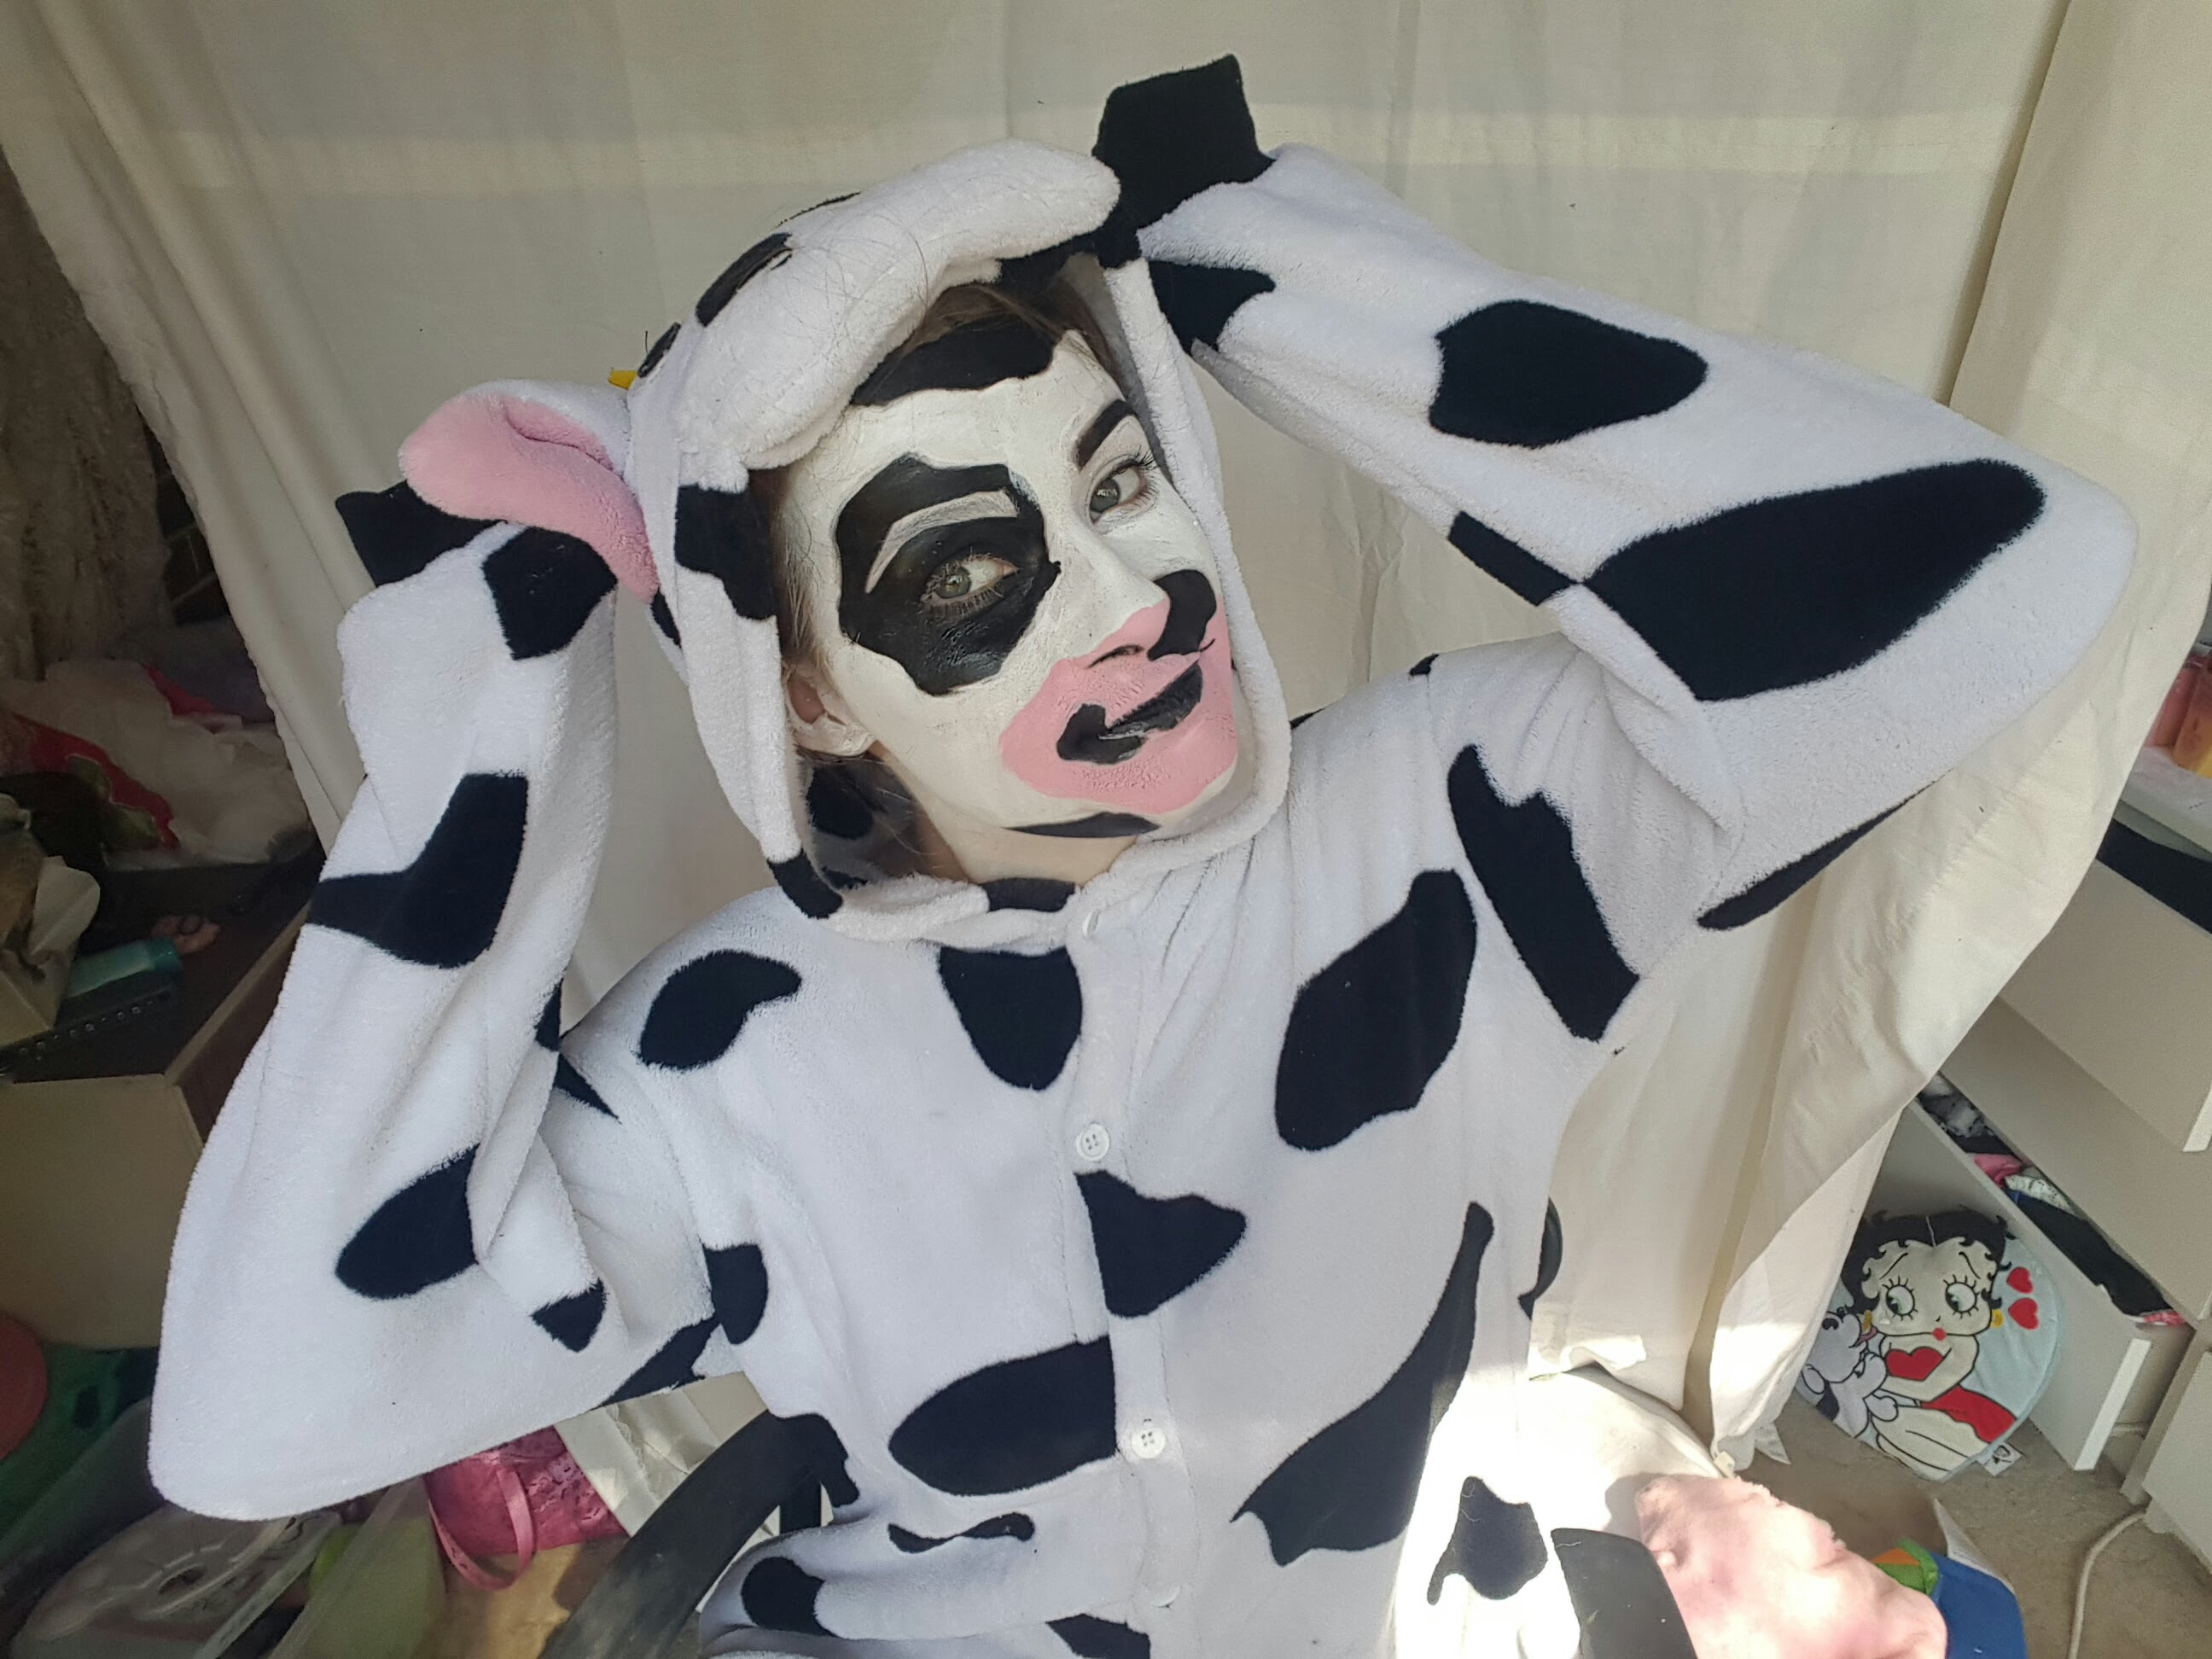 Cow Costume Makeup T. 2592x1944. 